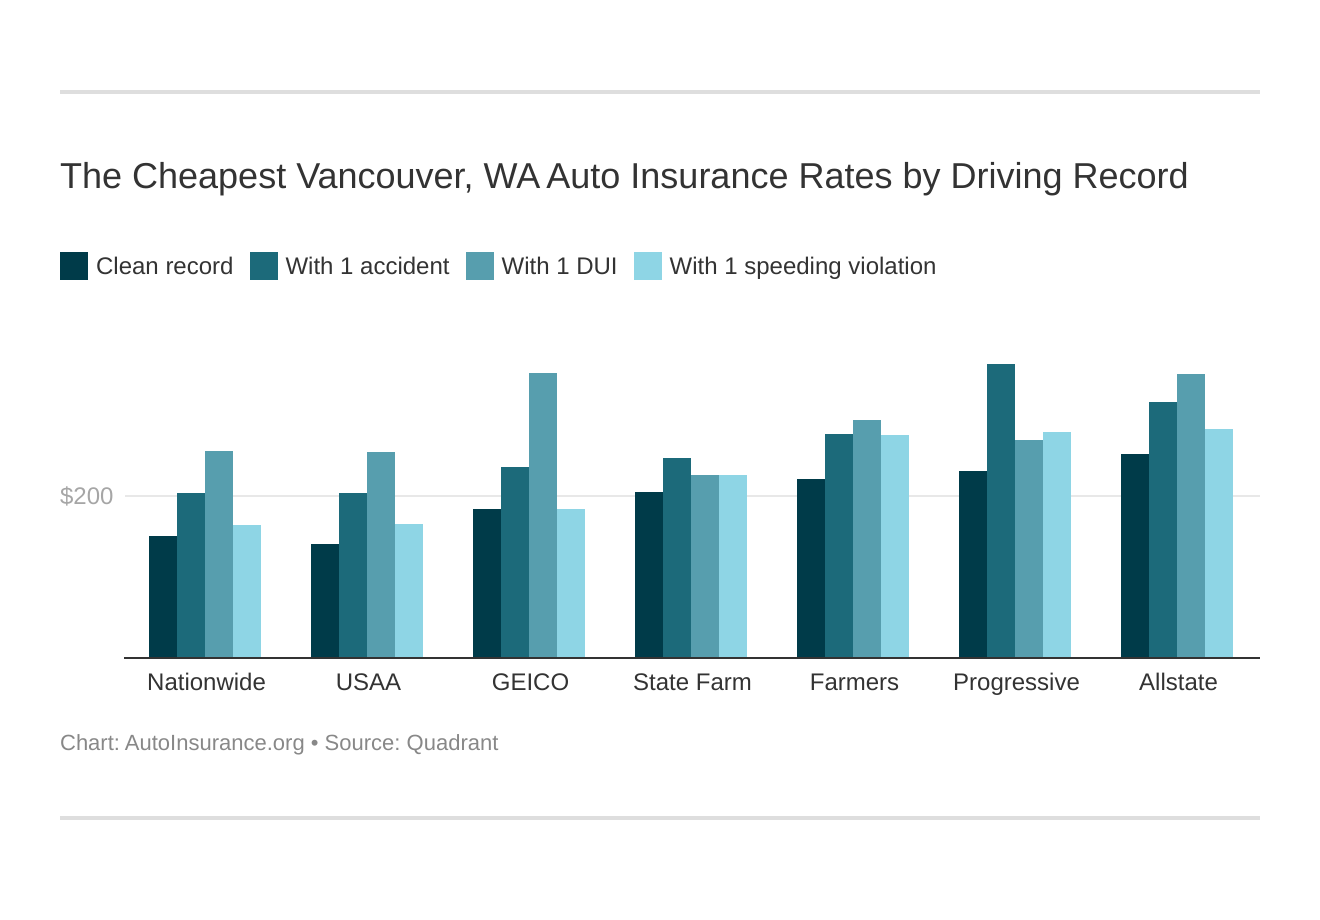 The Cheapest Vancouver, WA Auto Insurance Rates by Driving Record